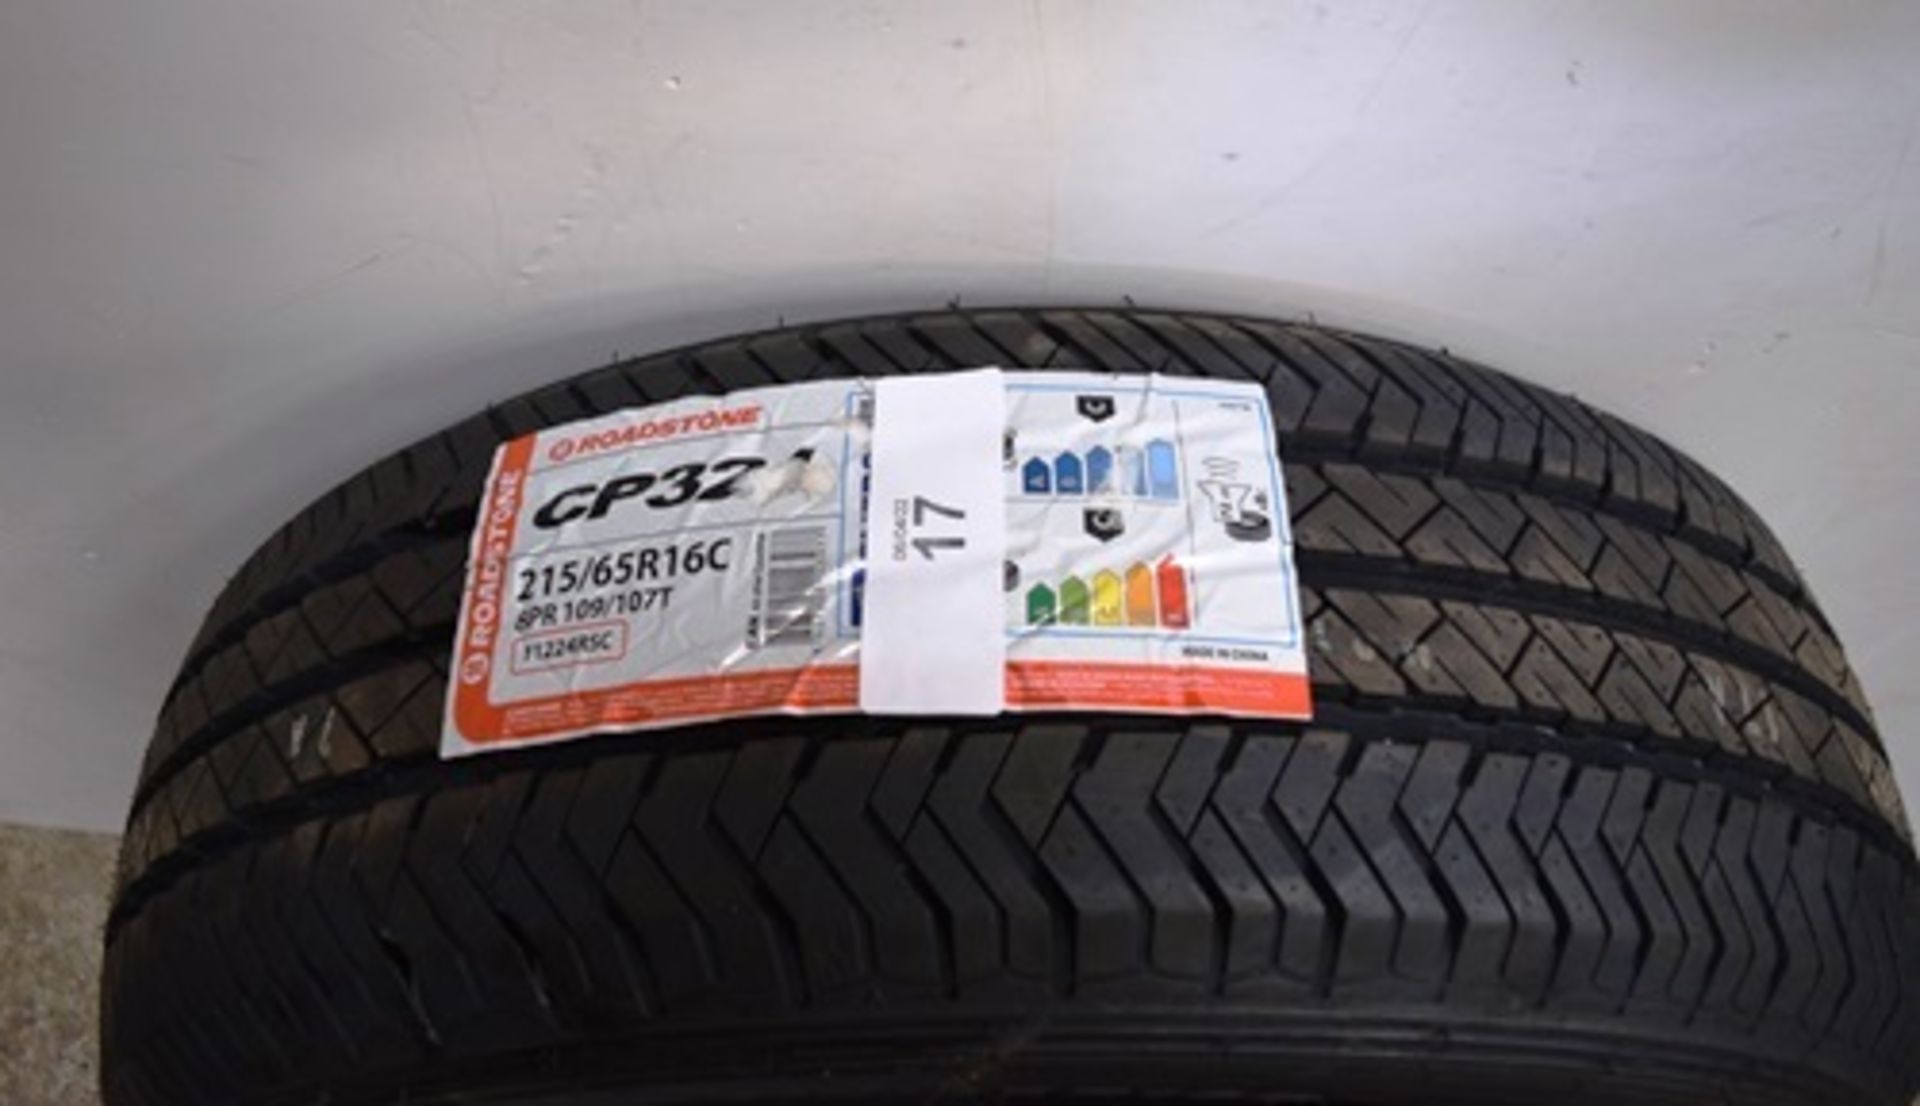 A set of 4 x Roadstone CP 321 tyres, size 215/65 R16C 8PR 109/107T - New with label (GS5end)